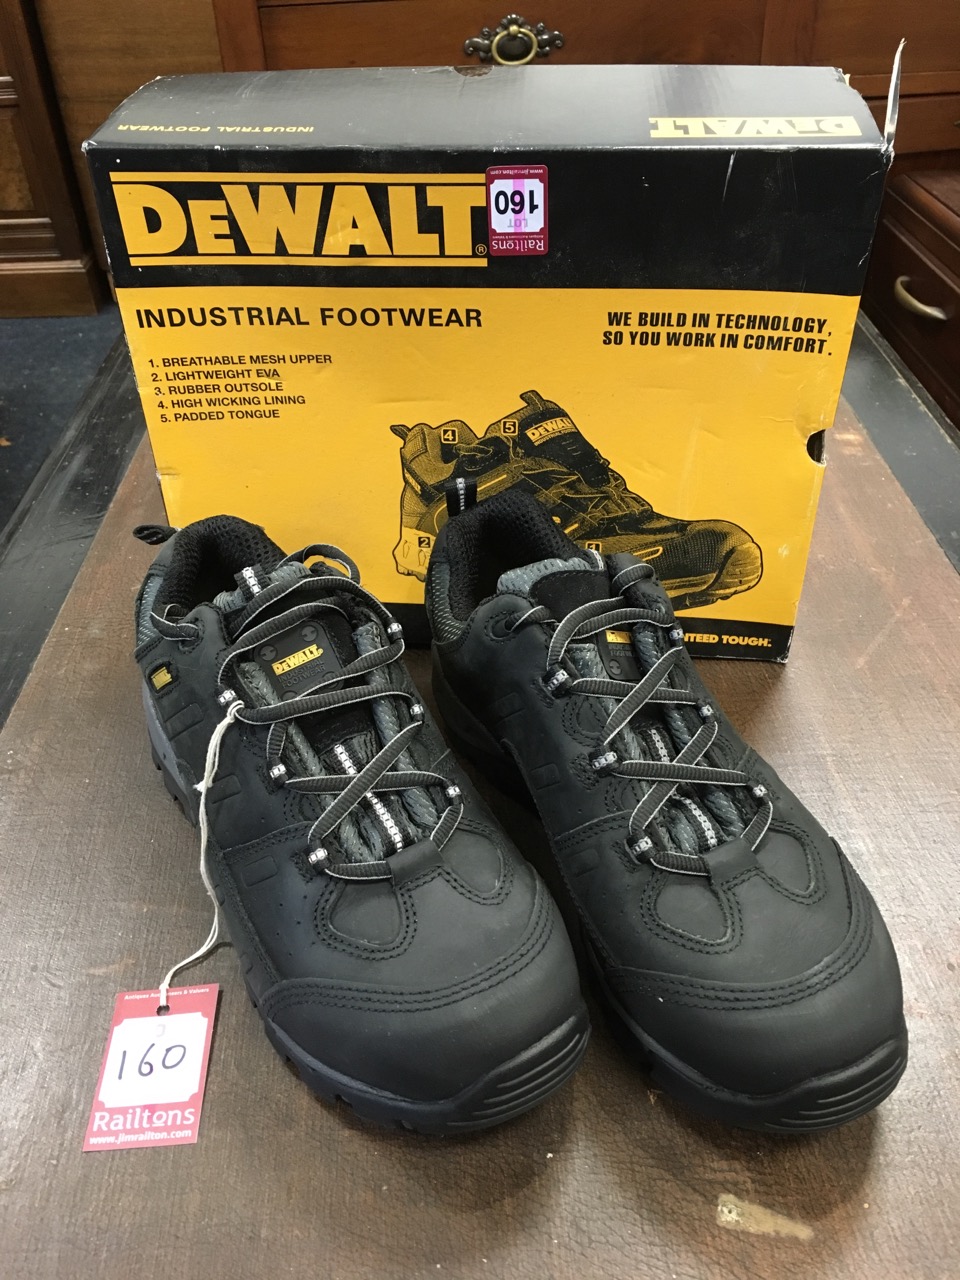 A boxed pair of DeWalt size 9 work boots with metal toe caps, padded tongues, rubber cushion